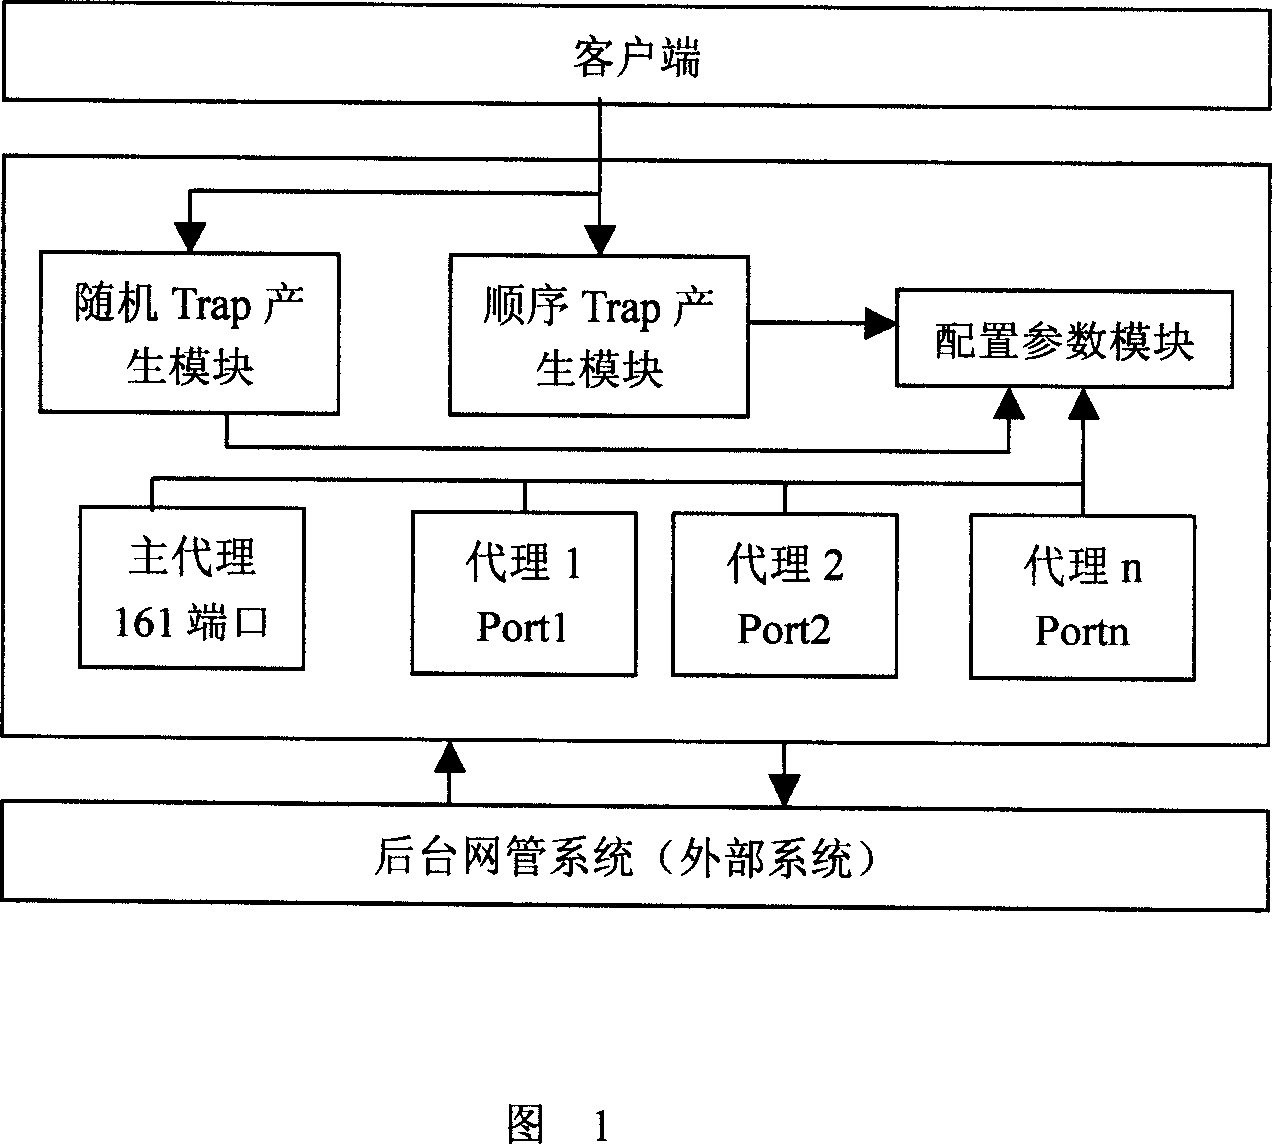 Method of simulating SNMP network element and performing network management system test with the network element